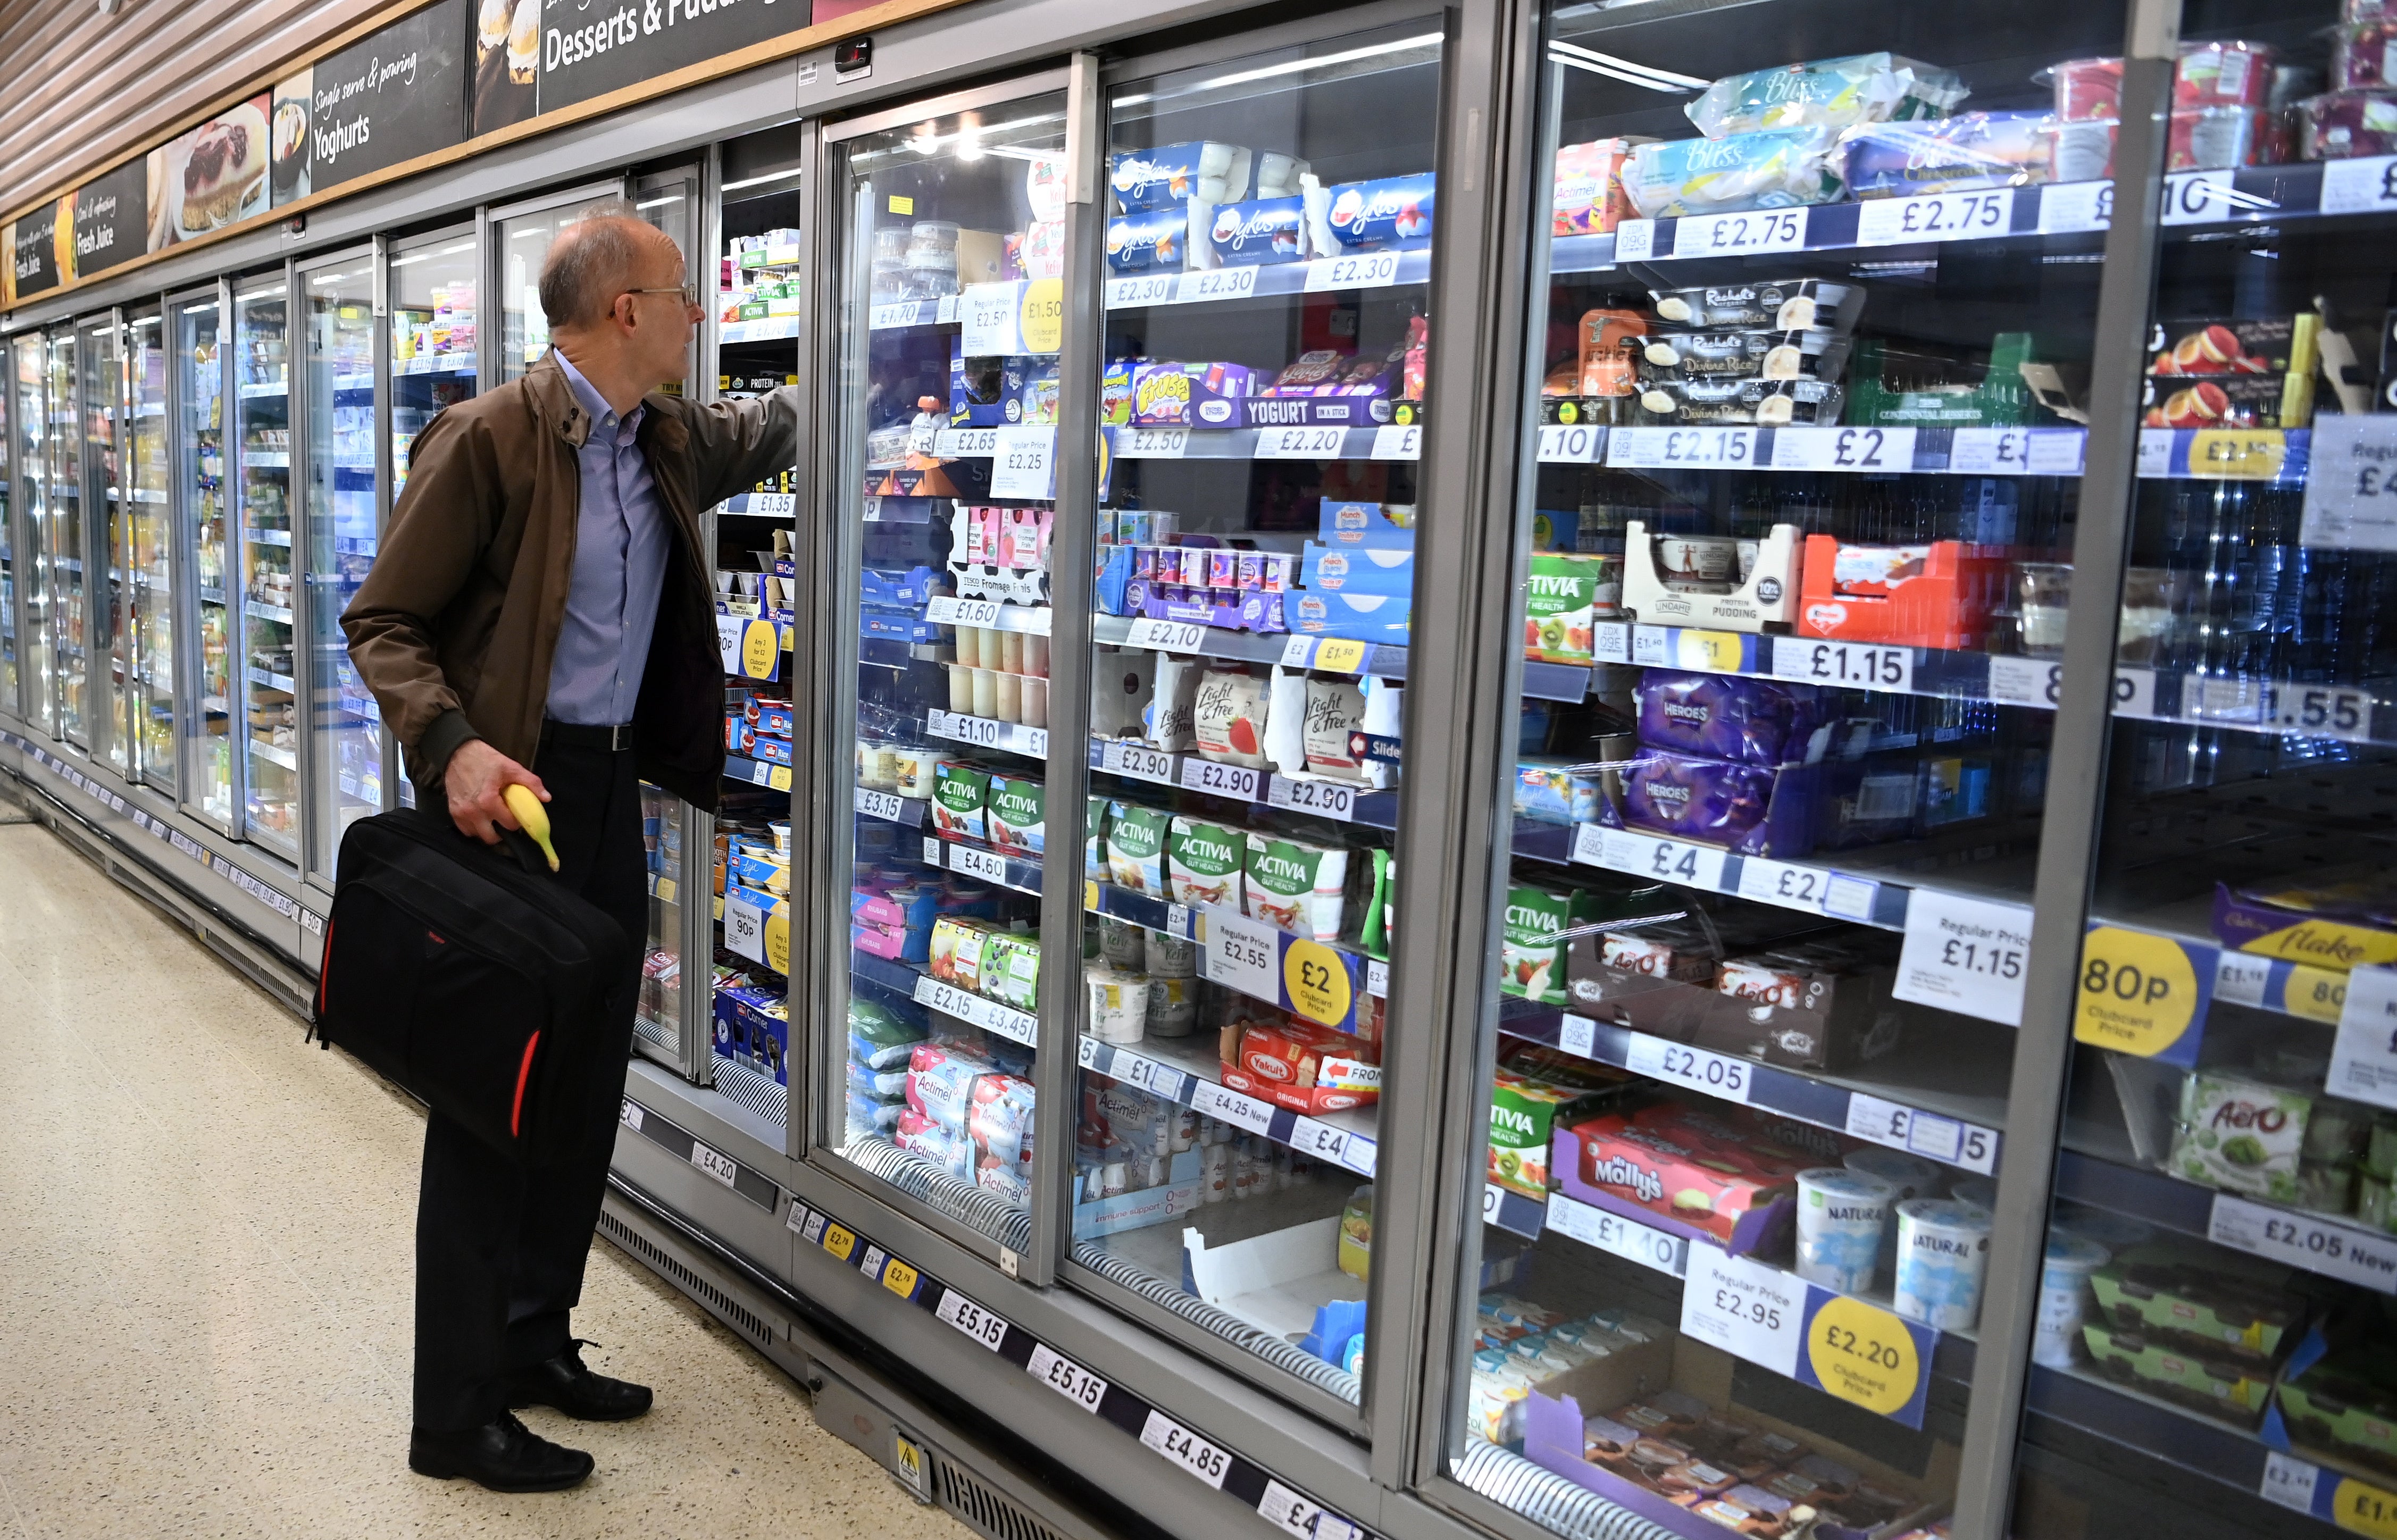 Tesco boss Ken Murphy believes food prices could start to ease soon